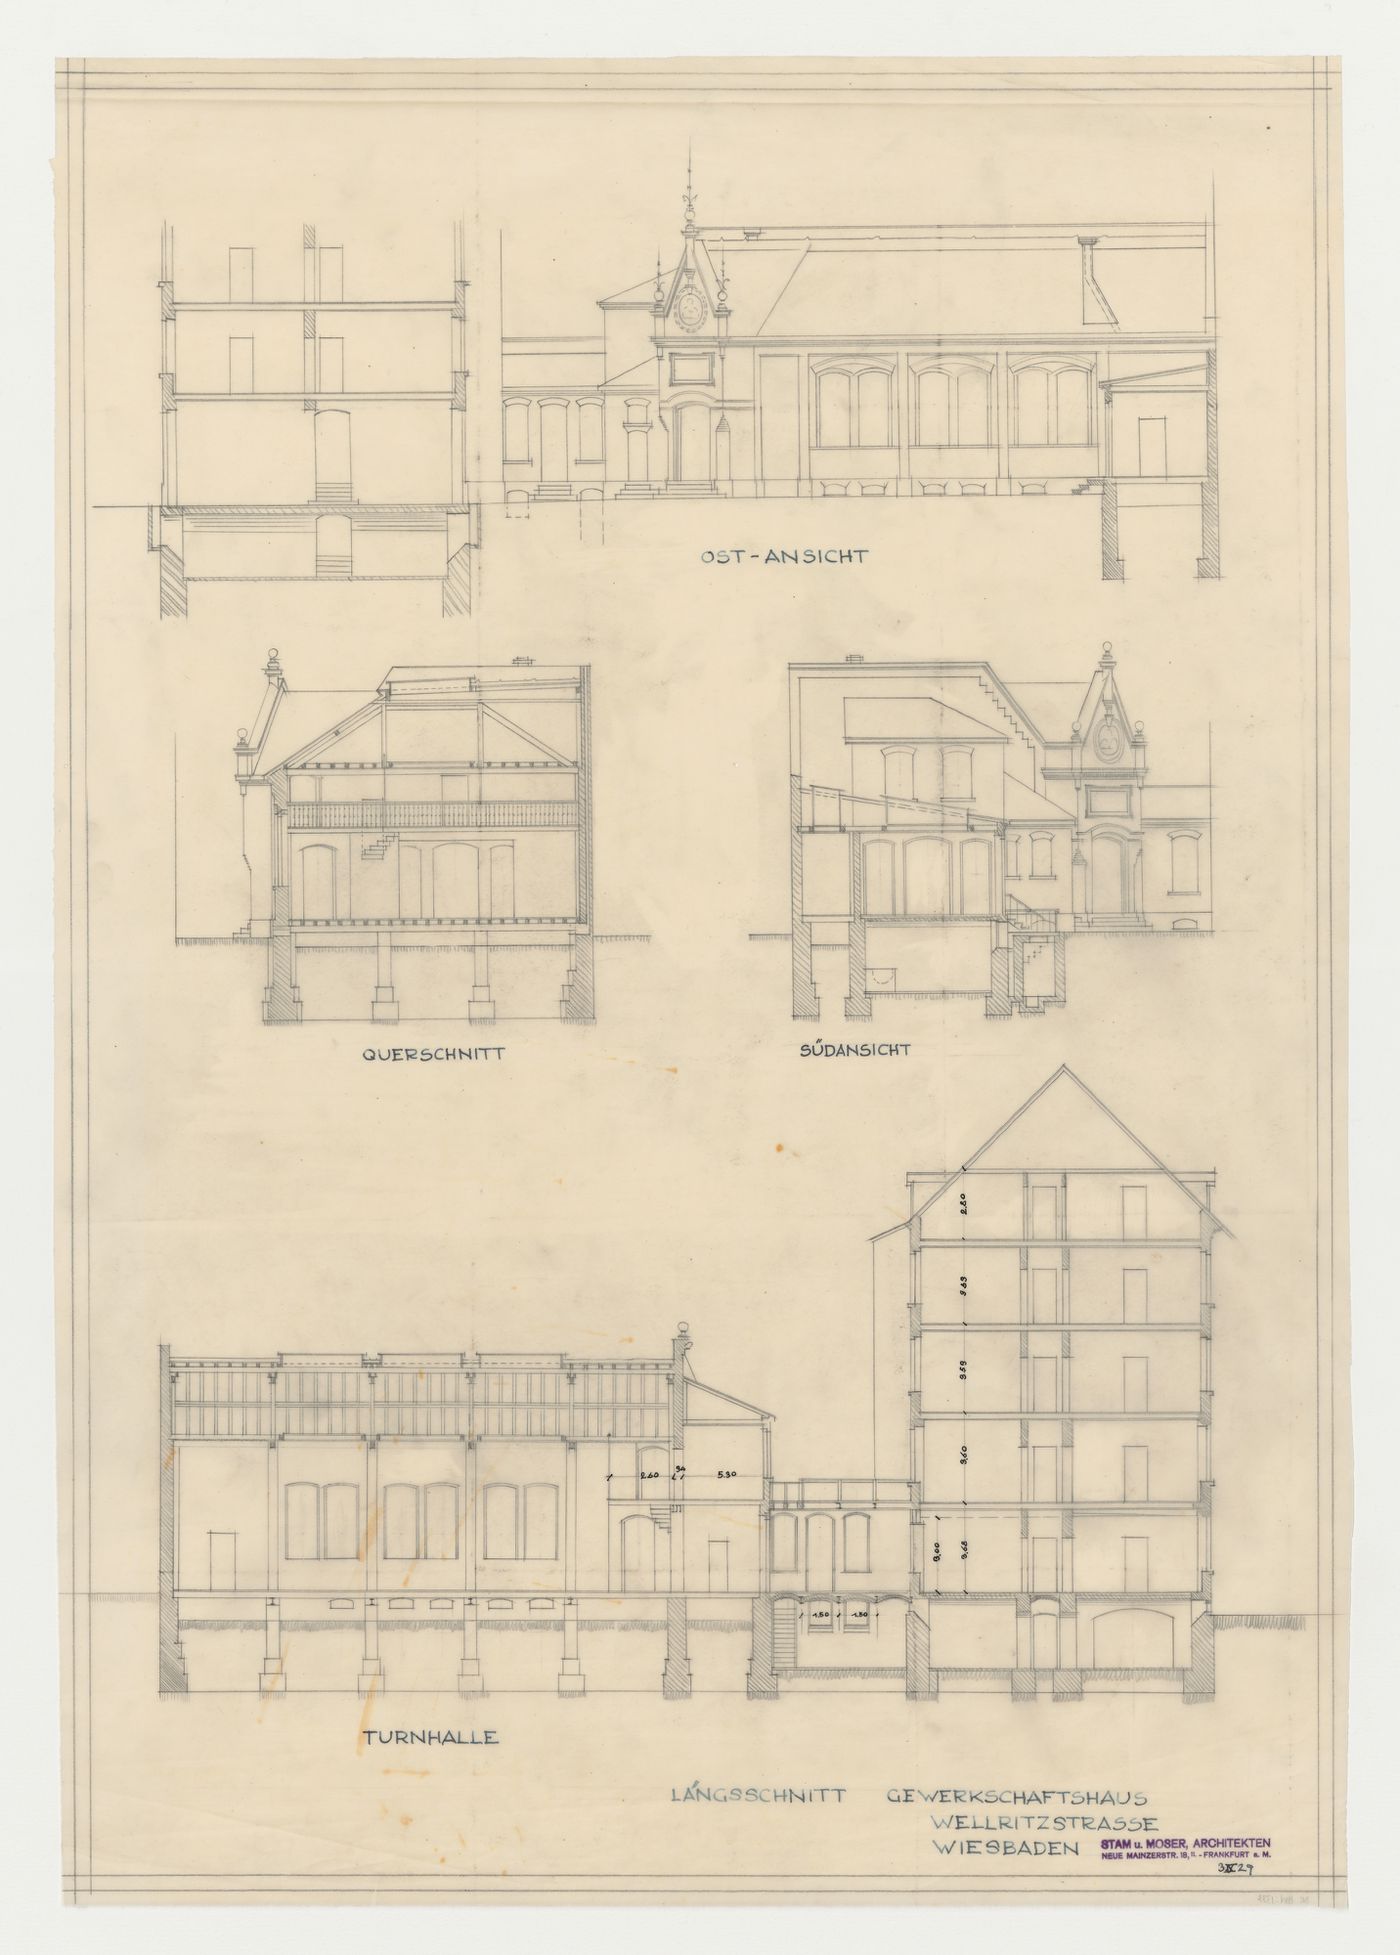 Sections, possibly for alterations and additions for a trade union corporate headquarters, Wiesbaden, Germany